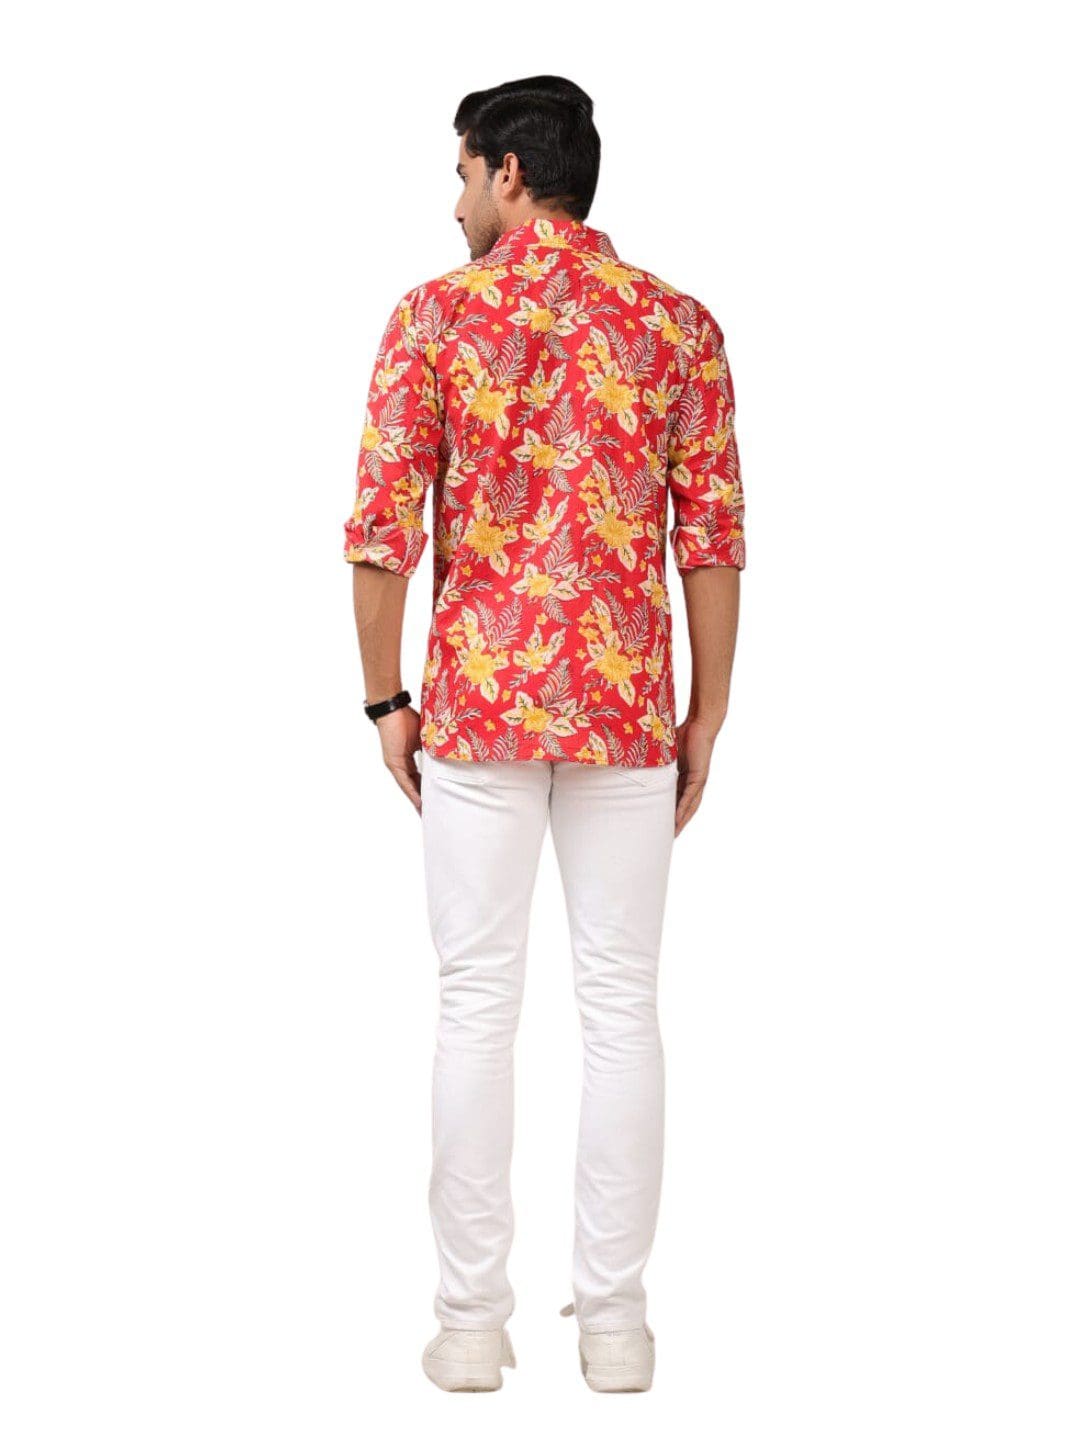 Buy Latest Pure Cotton Printed Shirt For Men